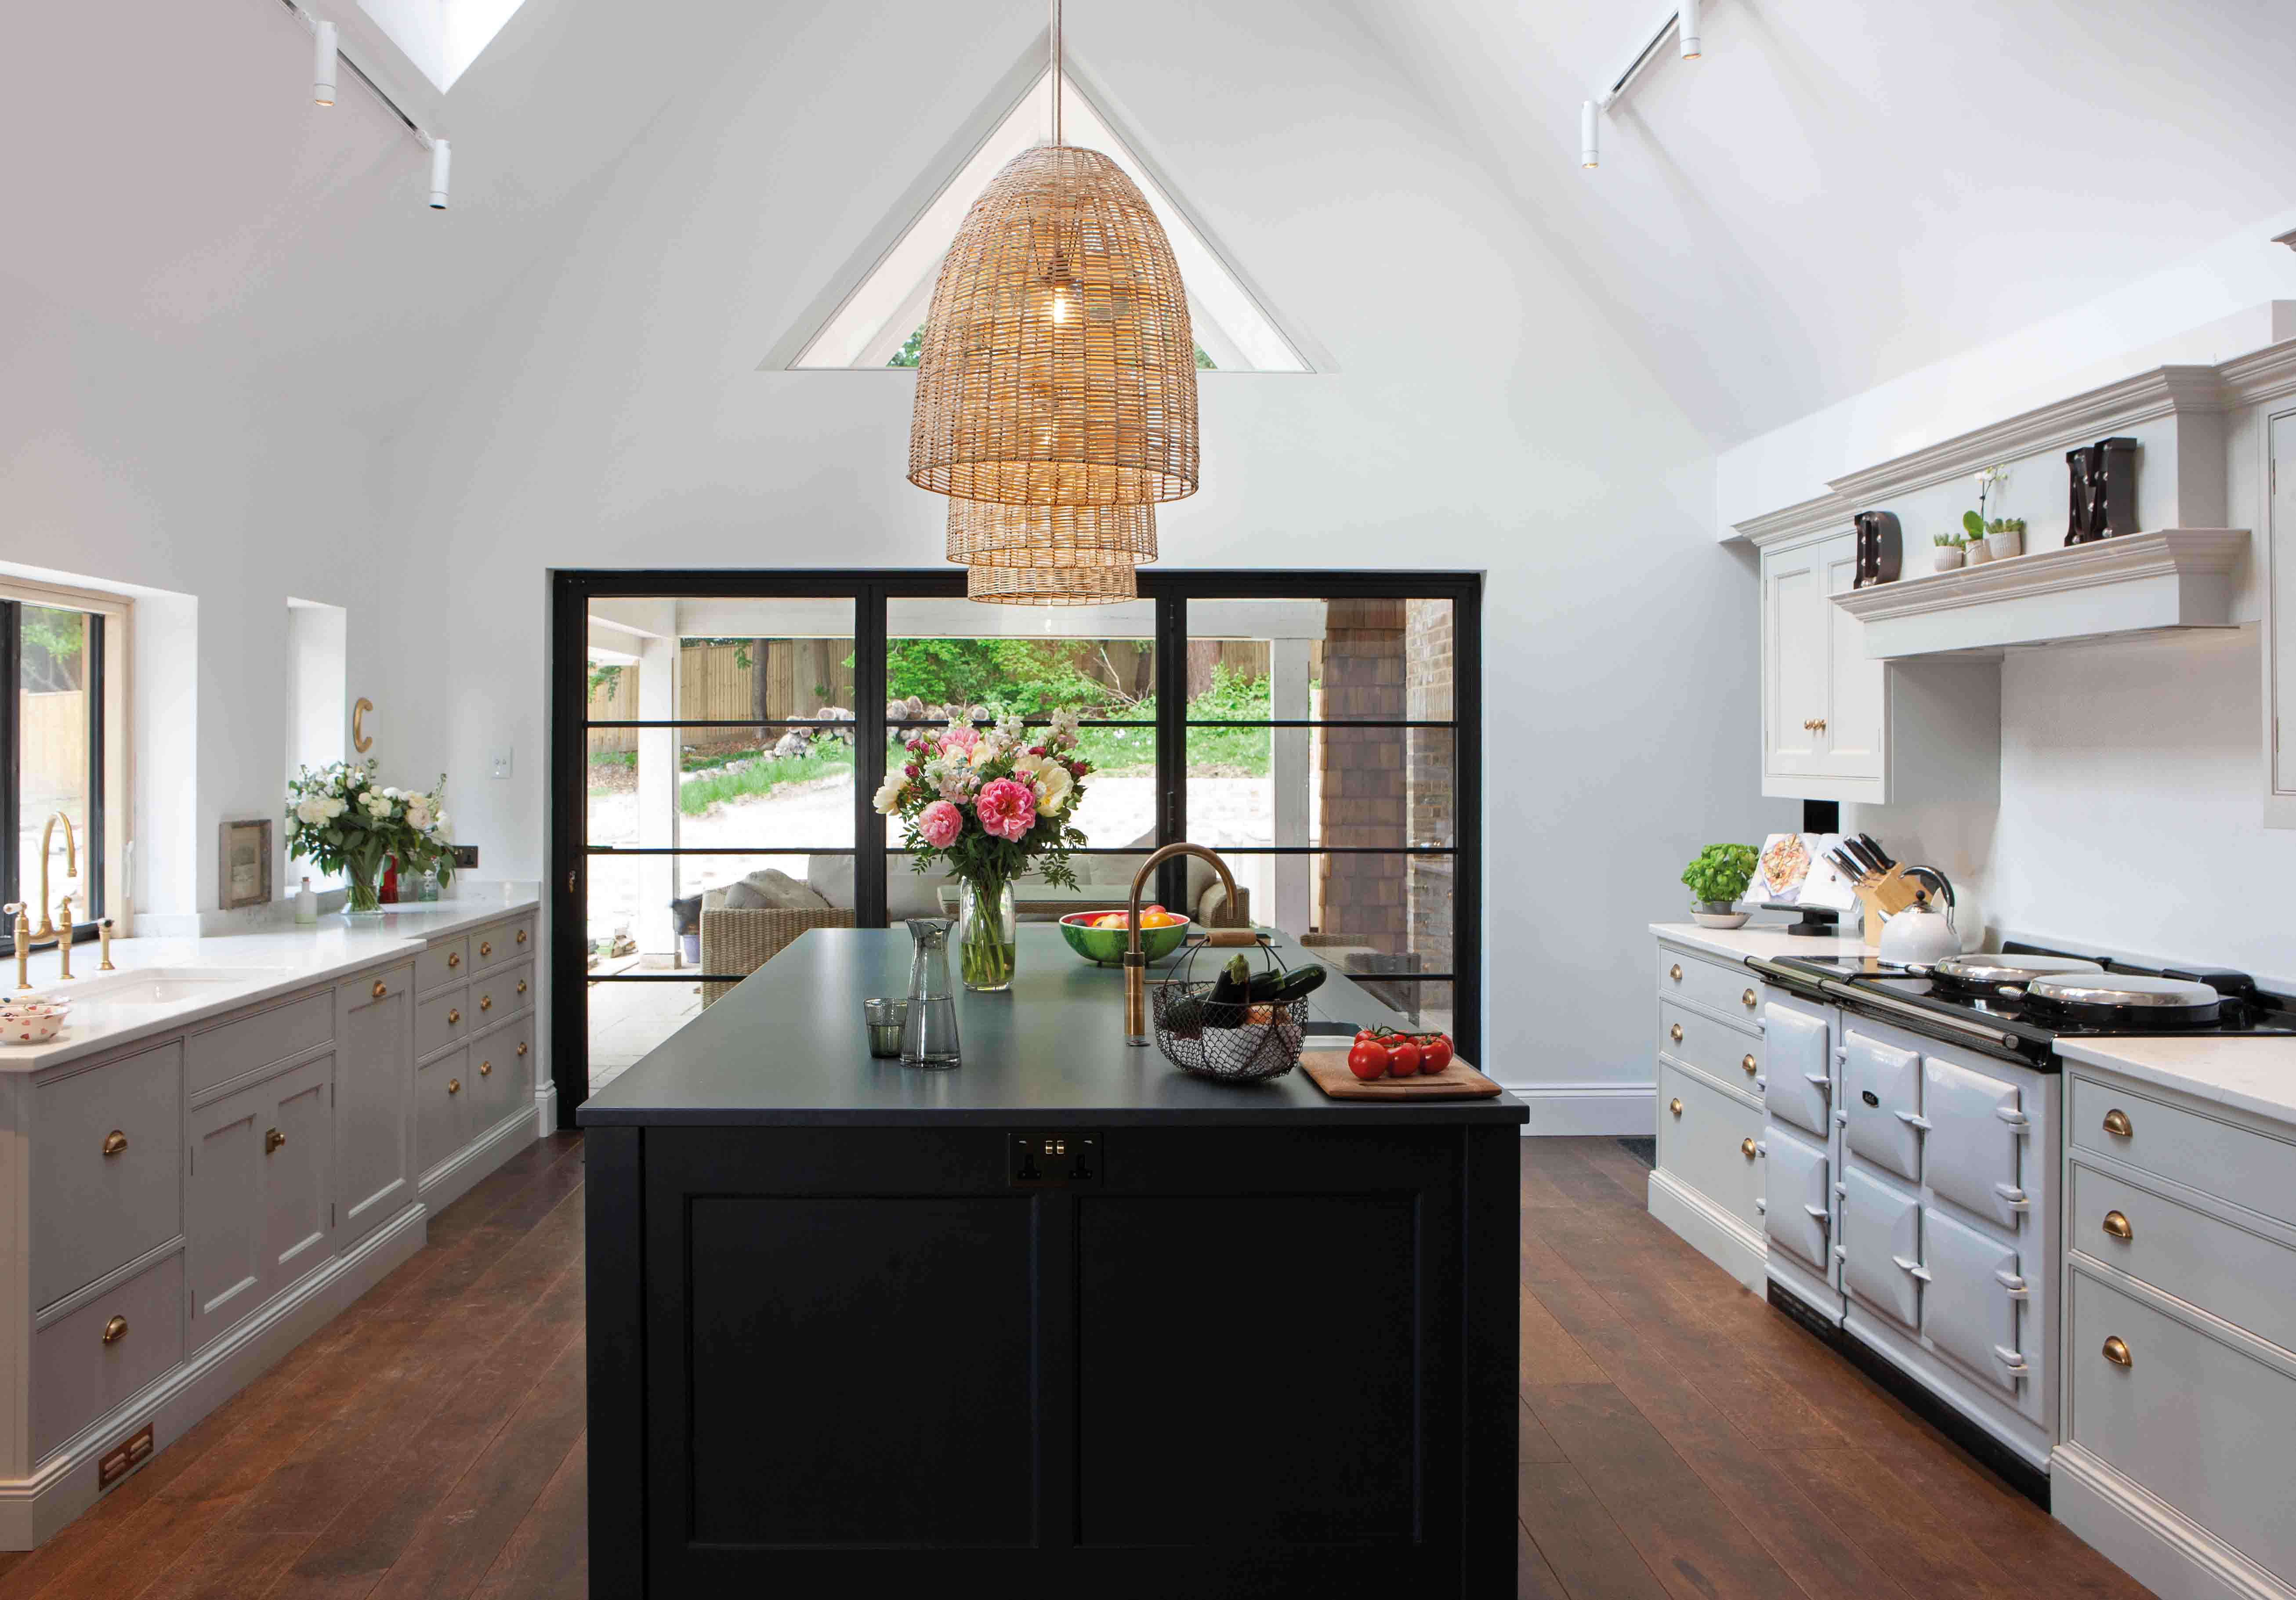 Davina McCall's Kitchen with an AGA 7 Series cooker in Pearl Ashes